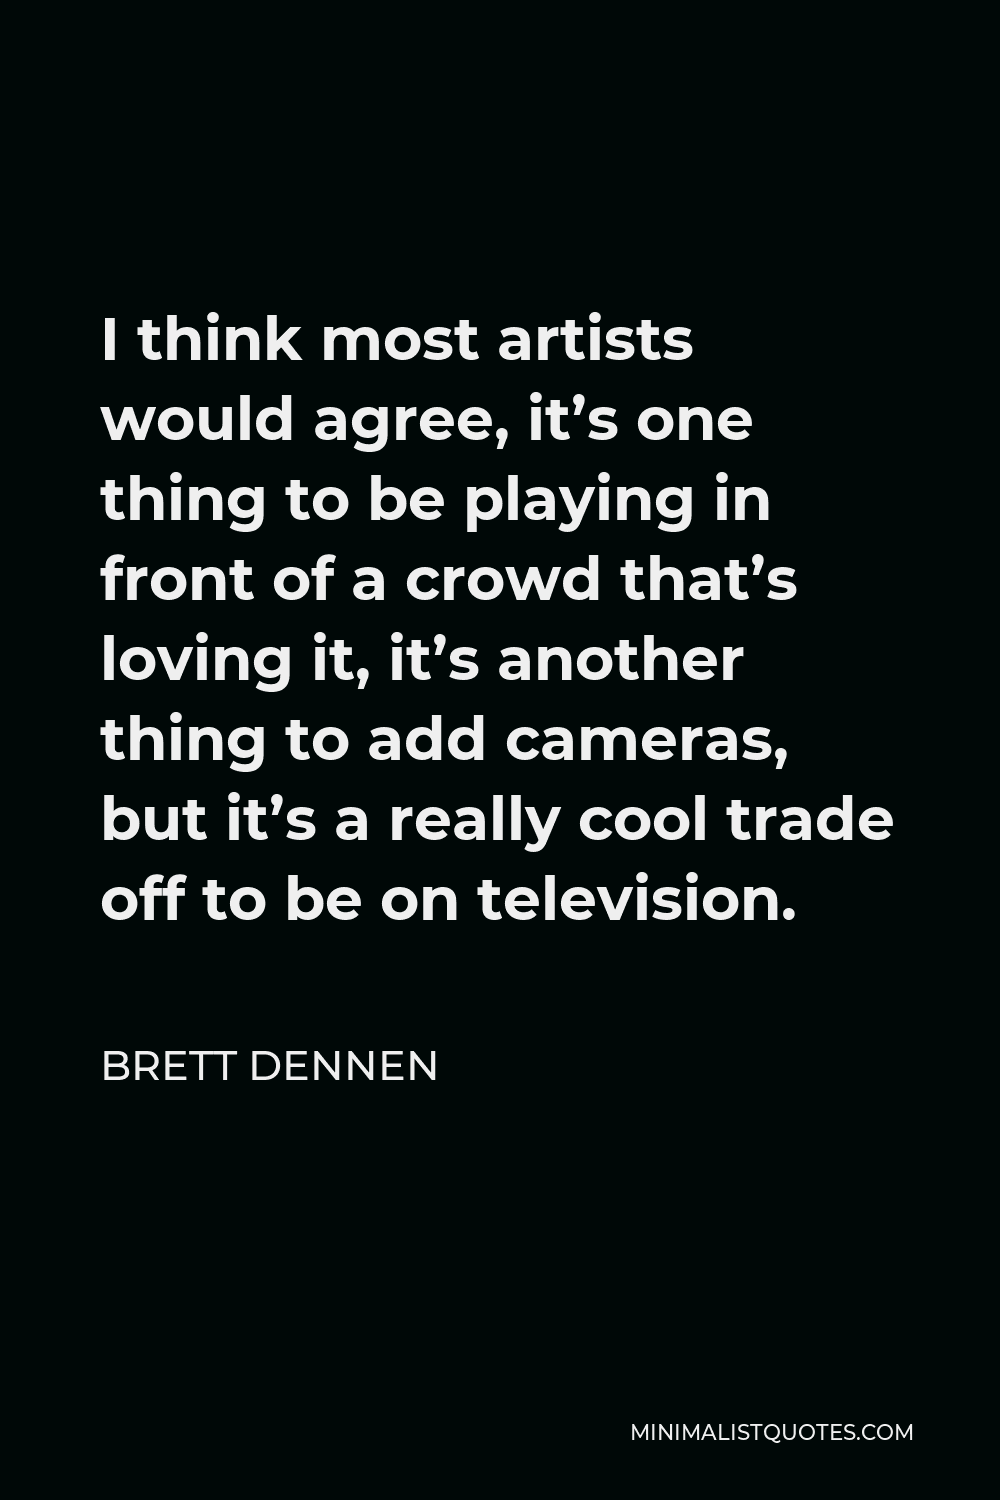 Brett Dennen Quote - I think most artists would agree, it’s one thing to be playing in front of a crowd that’s loving it, it’s another thing to add cameras, but it’s a really cool trade off to be on television.